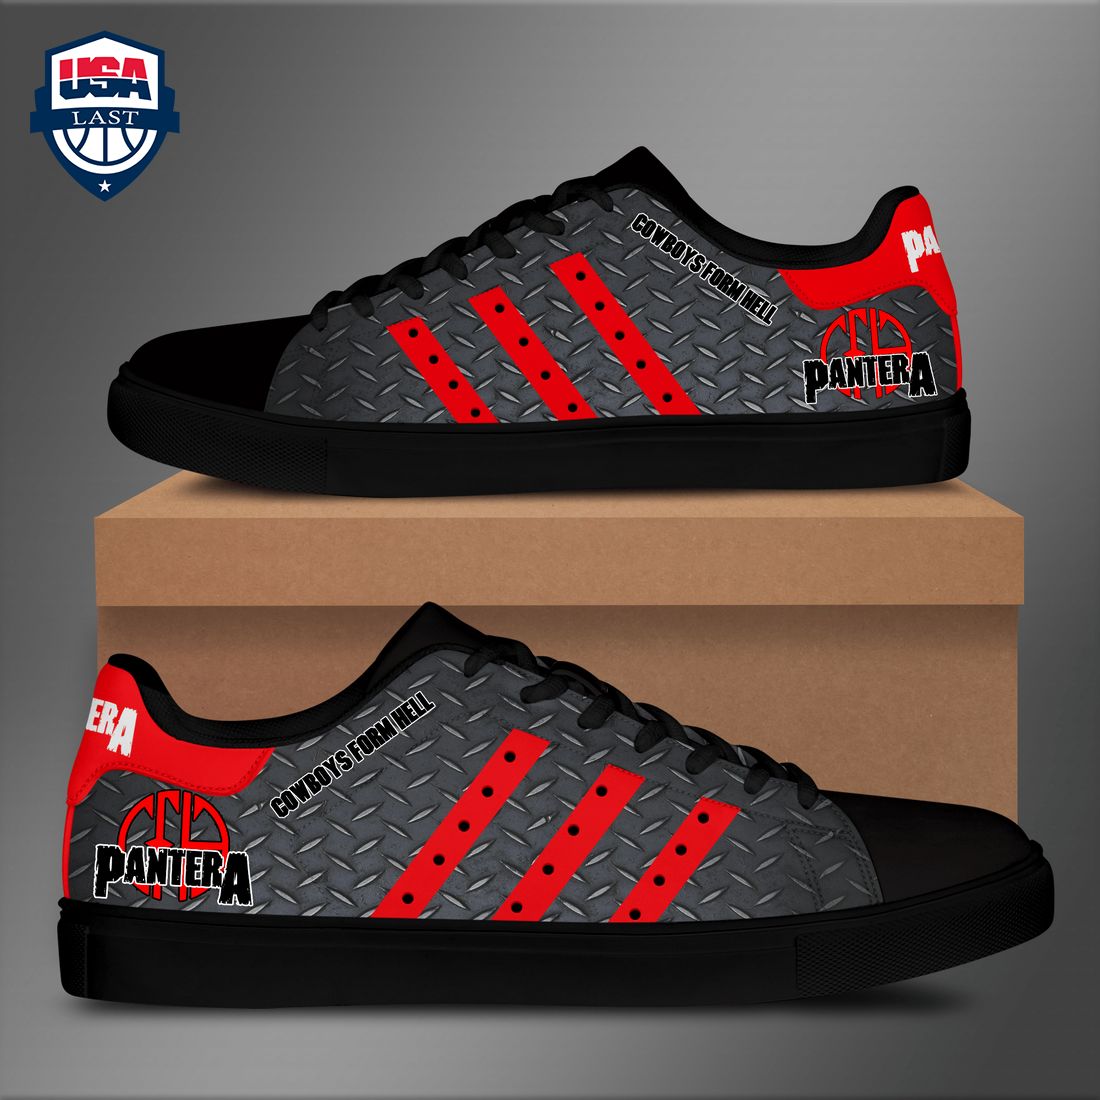 pantera-cowboys-from-hell-red-stripes-style-1-stan-smith-low-top-shoes-1-ft35g.jpg